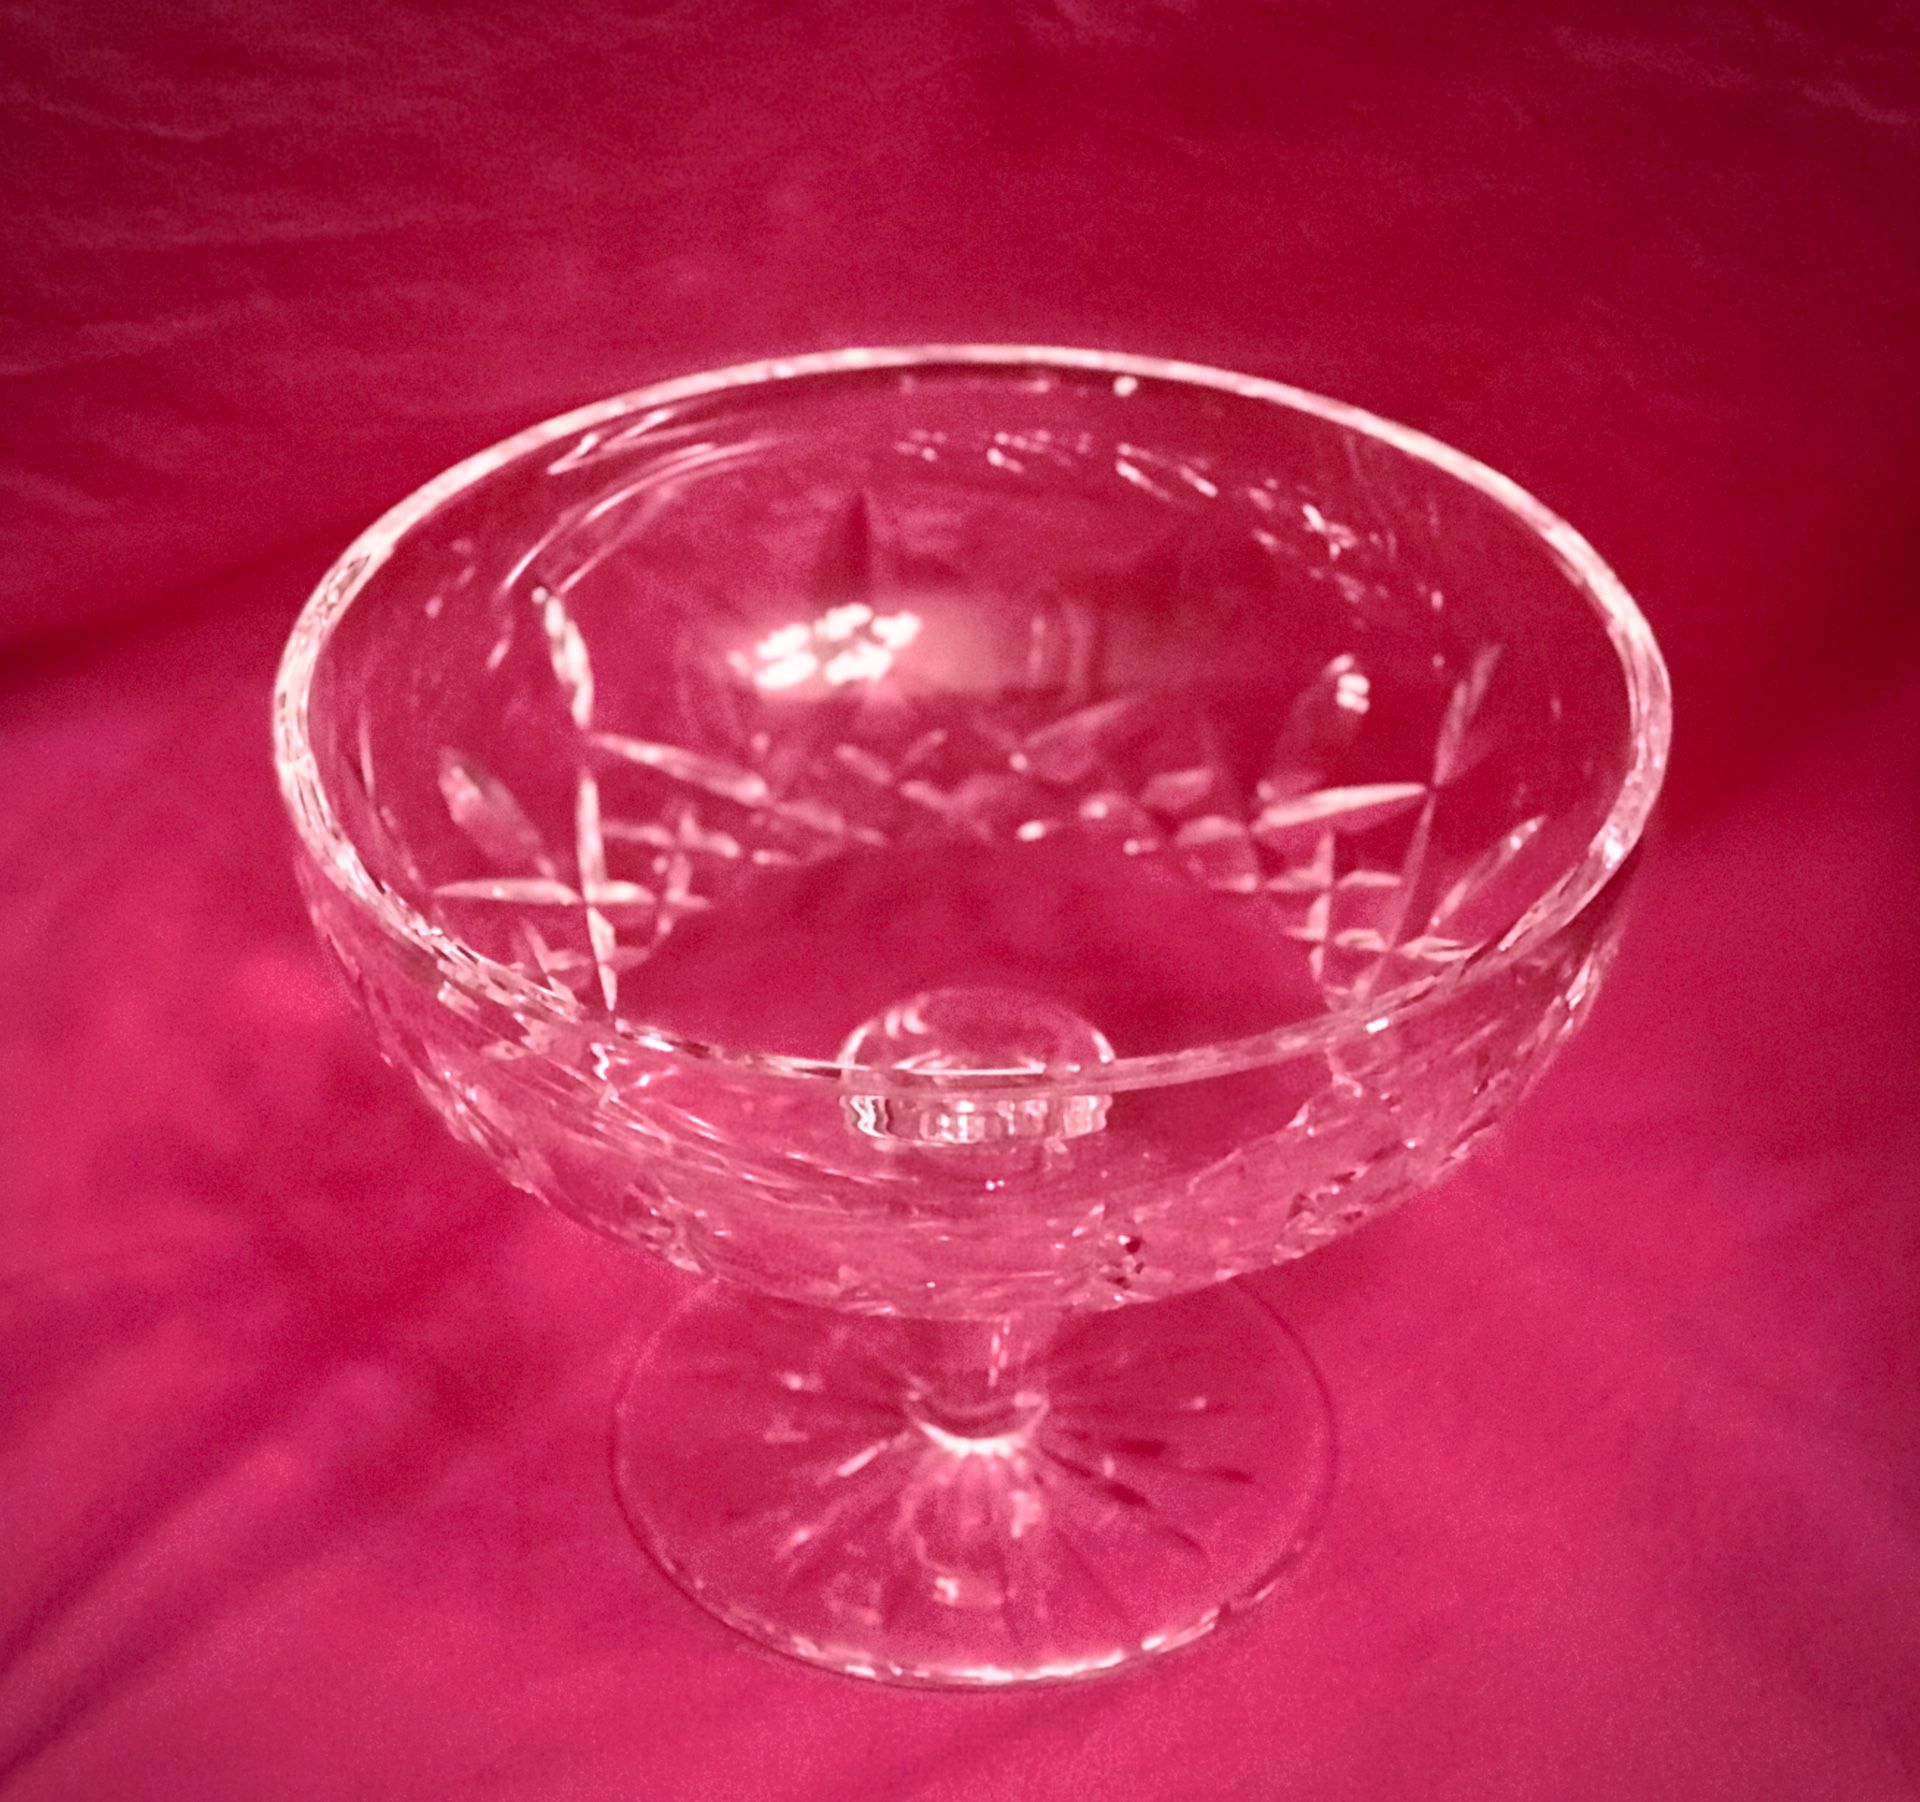 WATERFORD CRYSTAL LISMORE PATTERN STEMMED COMPOTE PEDESTAL BOWL CANDY DISH SIGN